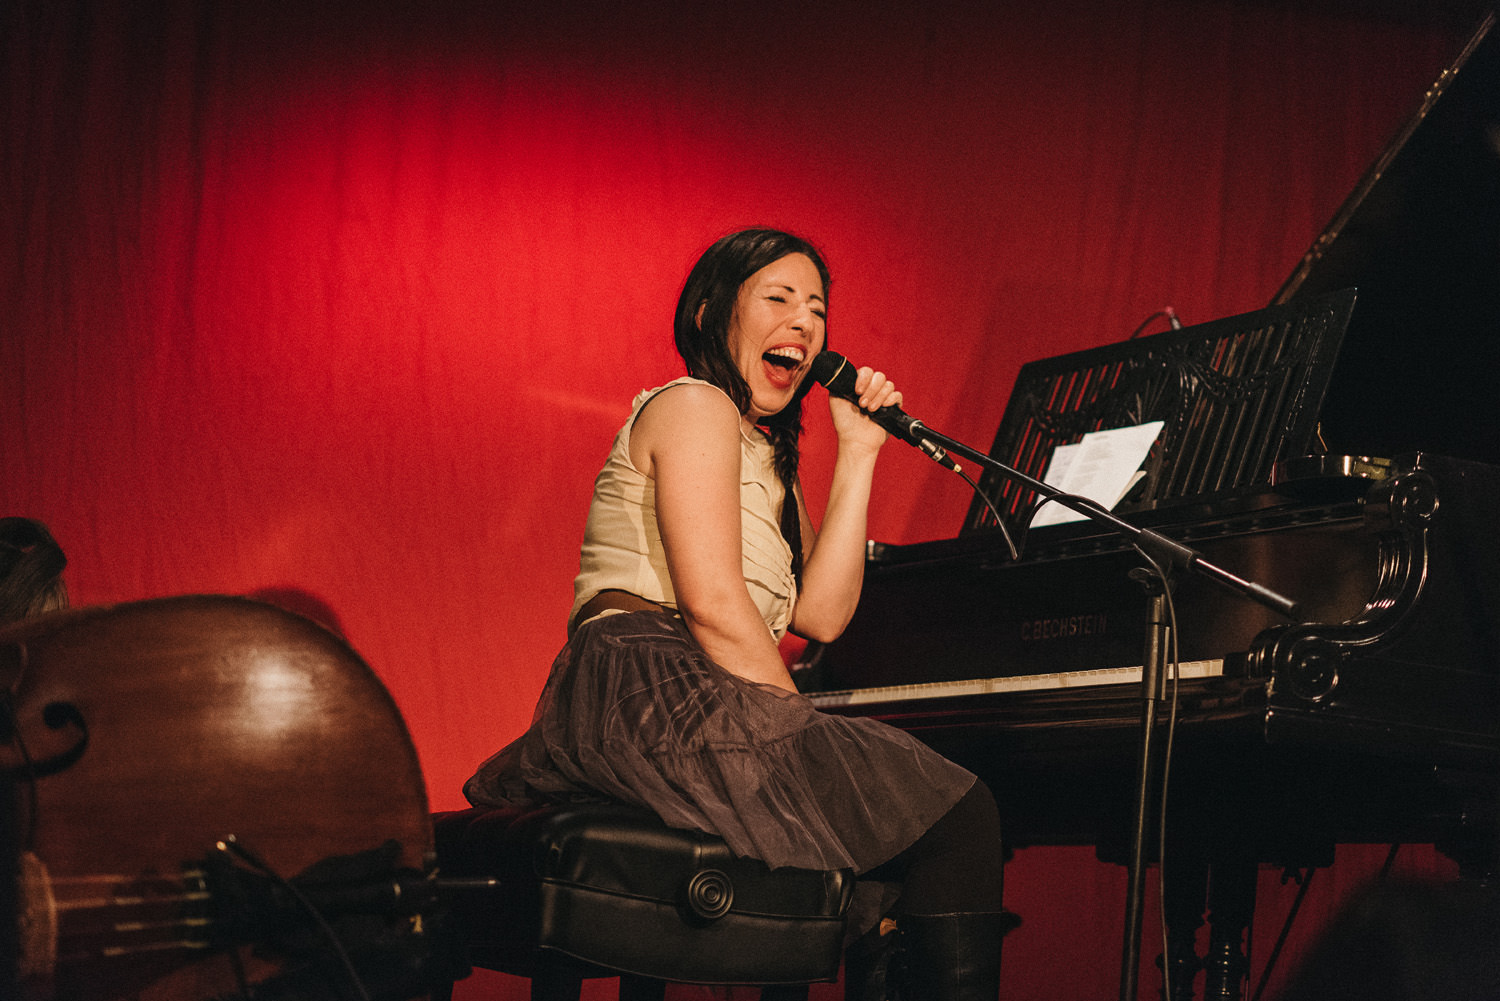 female singer songwriter laughing - on stage - hornby island